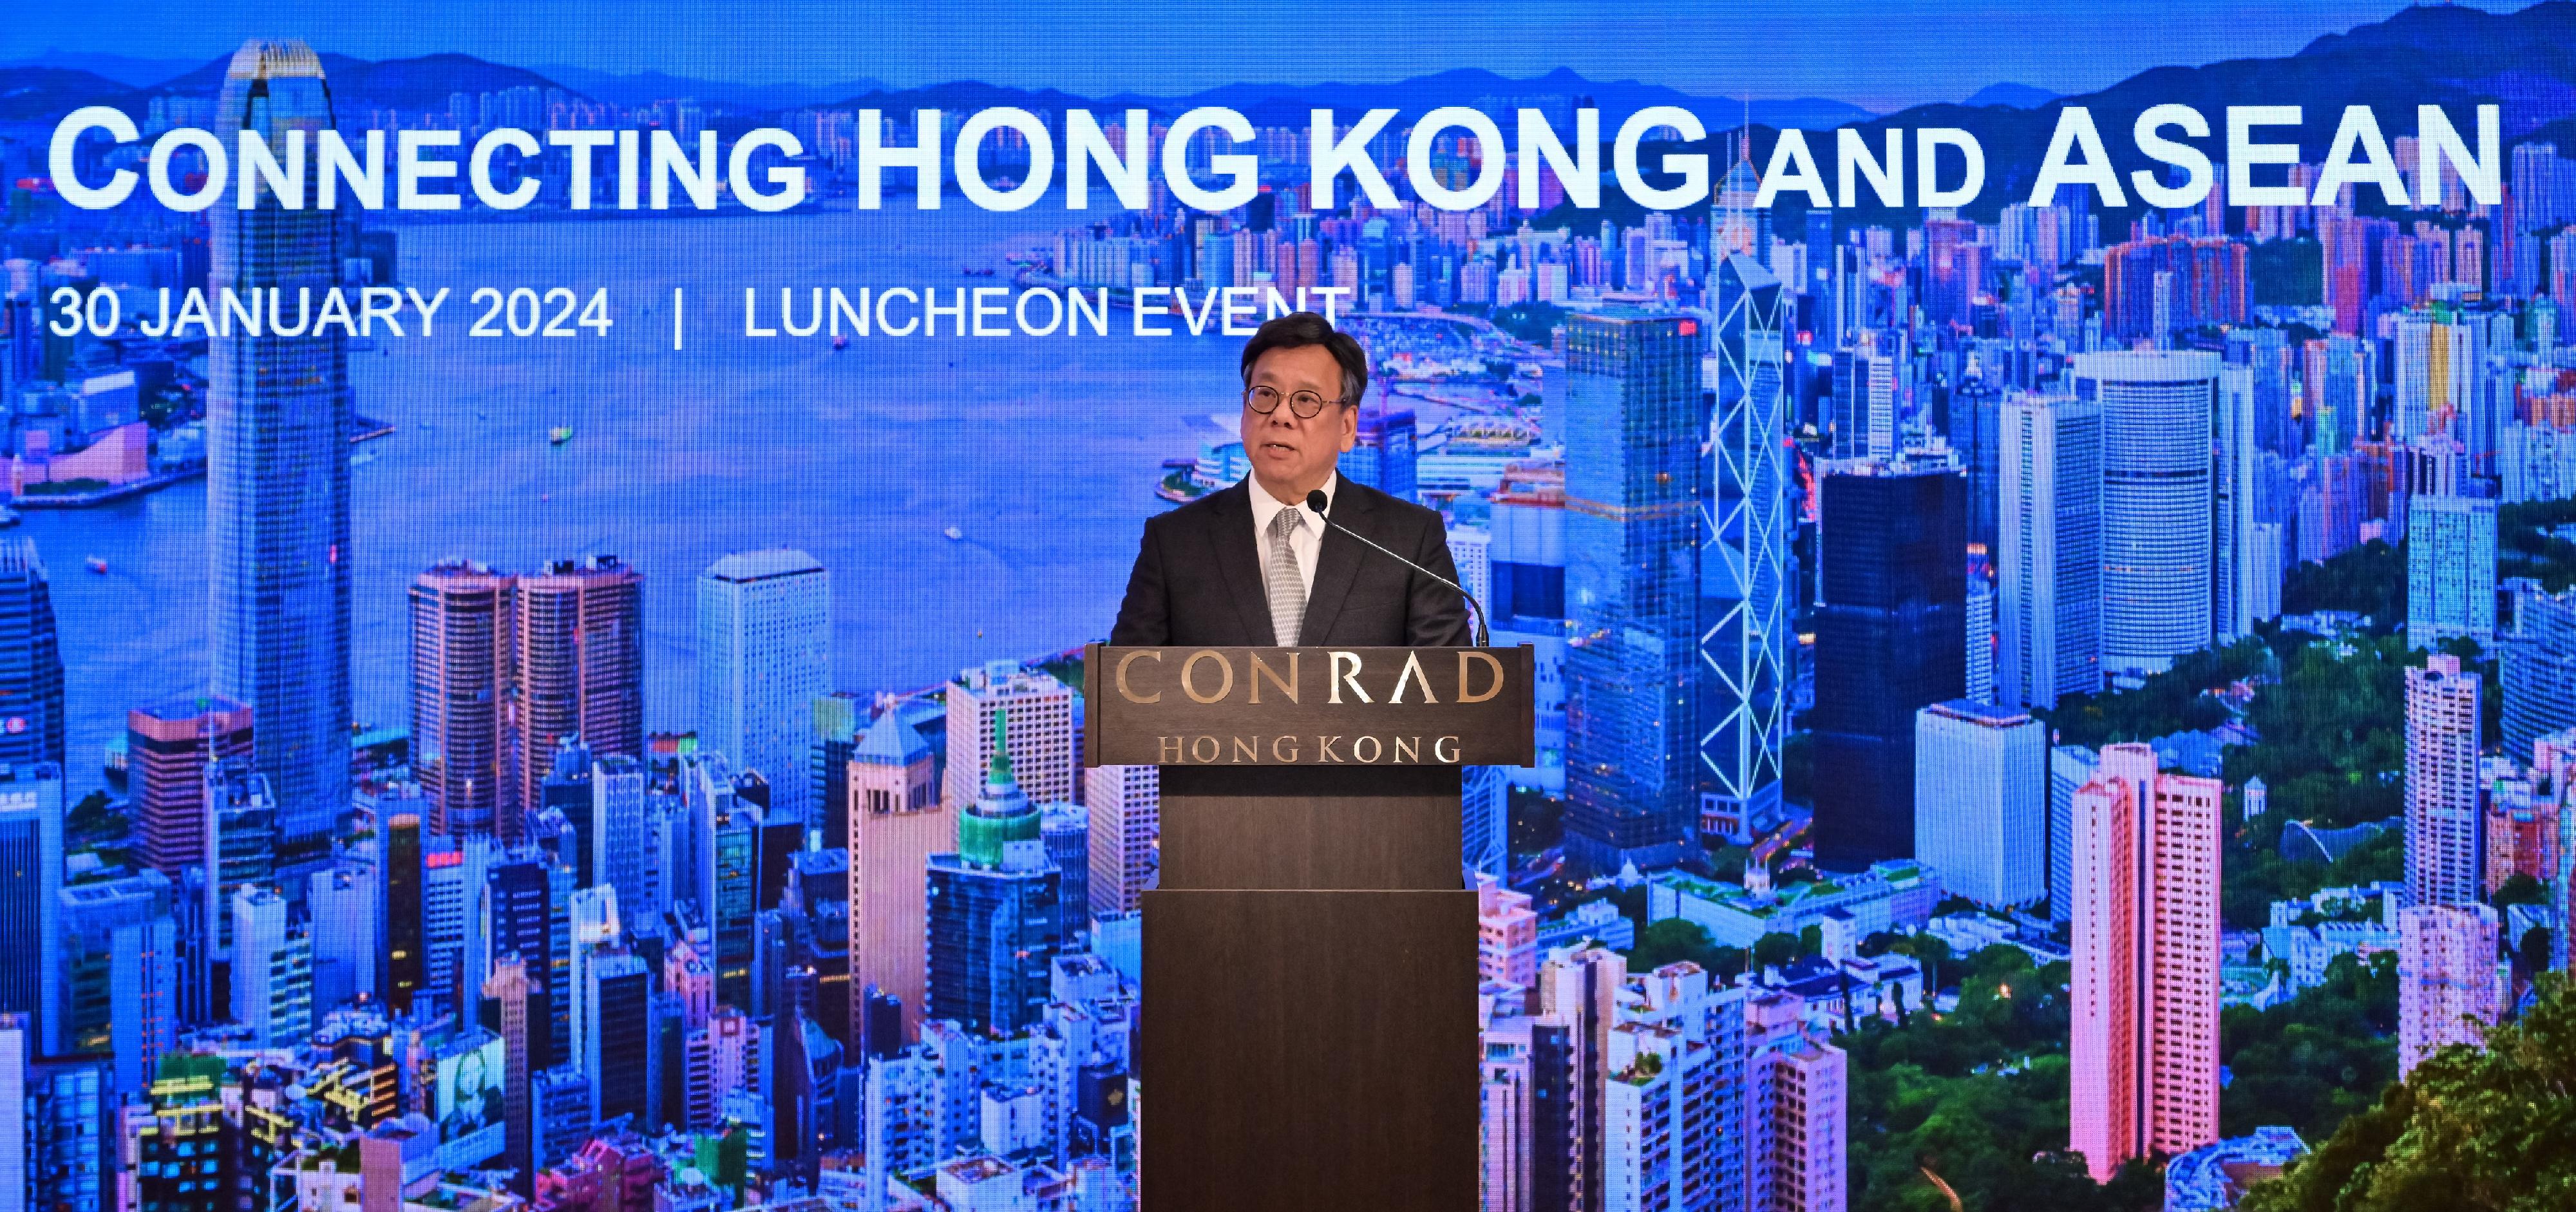 The Secretary for Commerce and Economic Development, Mr Algernon Yau, today (January 30) attended the "Connecting Hong Kong and ASEAN" Luncheon co-organised by the Trade and Industry Department and Invest Hong Kong for some 120 representatives of consulates, local and foreign chambers of commerce, professional bodies and the business community to update them on the Government's work on strengthening connection with the Association of Southeast Asian Nations. Photo shows Mr Yau speaking at the luncheon.